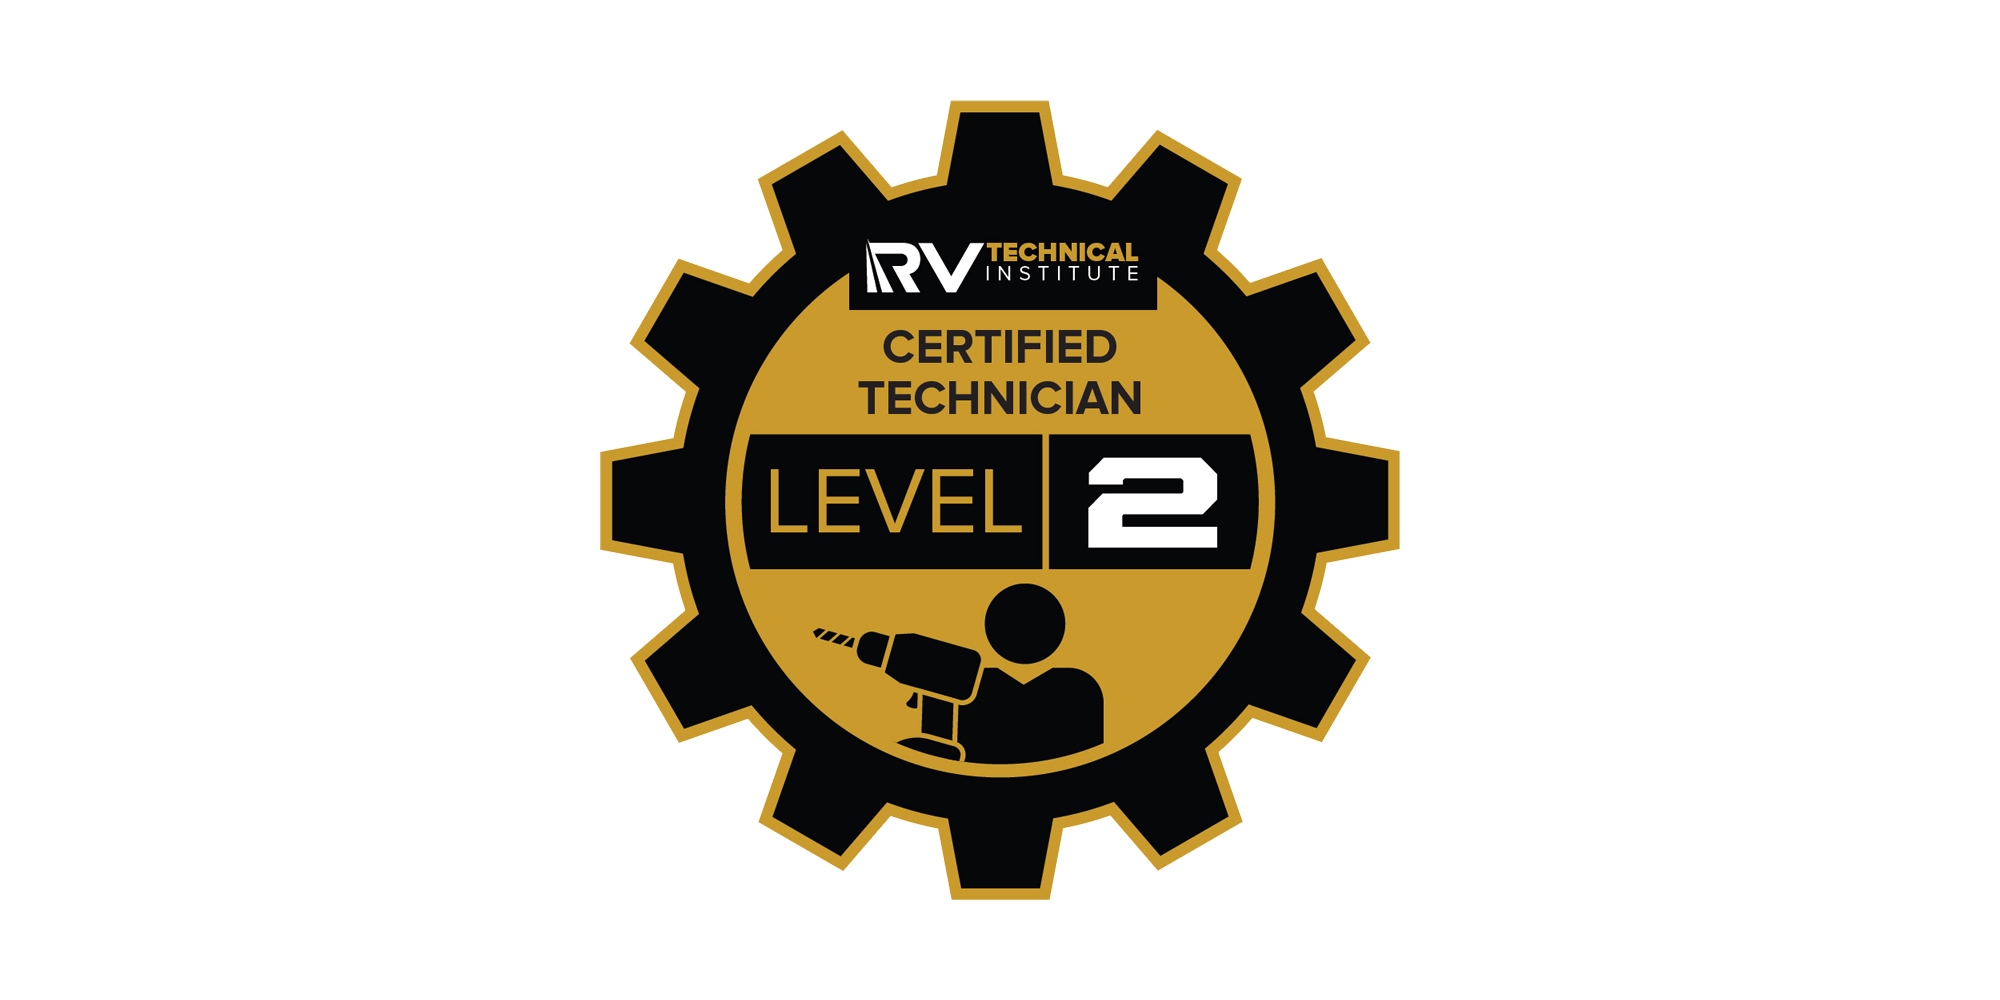 RV Technical Institute's logo for the Level 2 Certified Technician certification